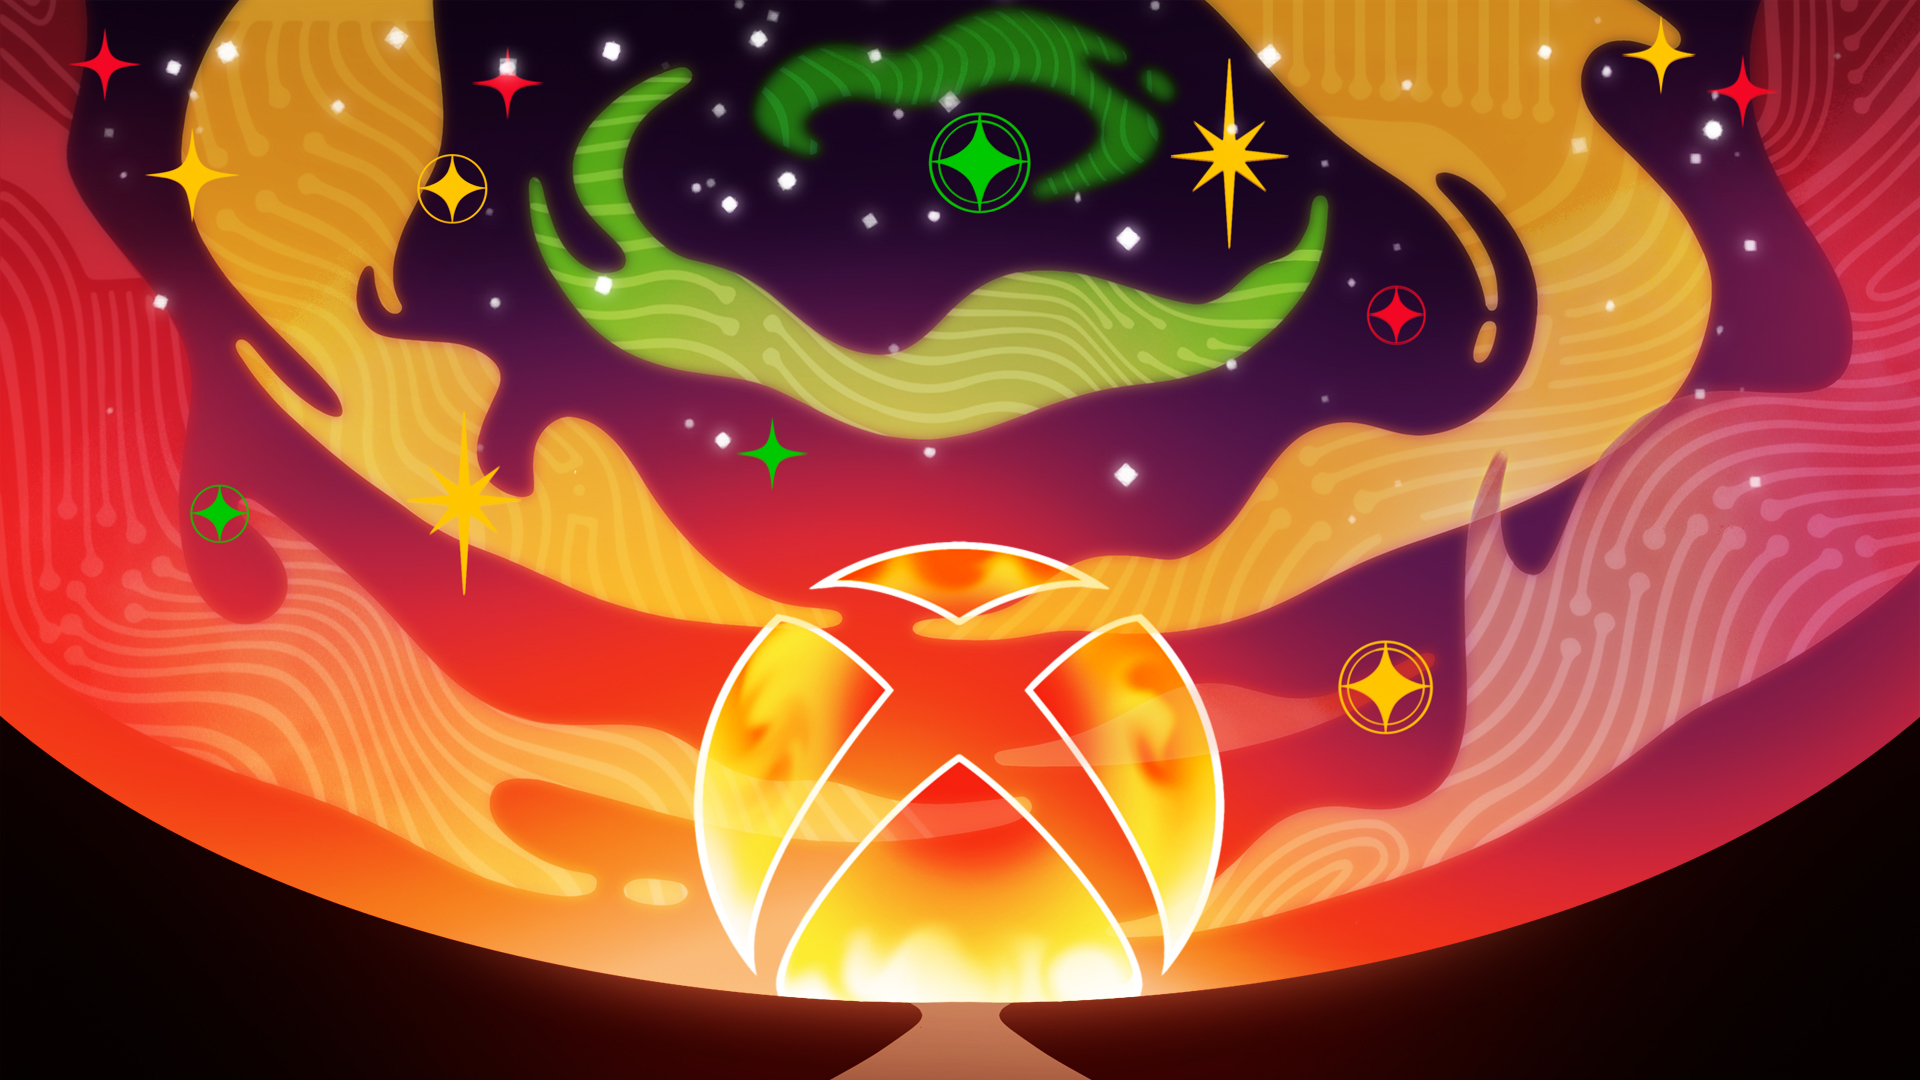 The Xbox logo stylized in celebration of Black History month featuring an Xbox logo with a red and orange sunset over a brown and black silhouetted pathway on a background with red, yellow, and green stars and wispy clouds with a light computer board pattern.